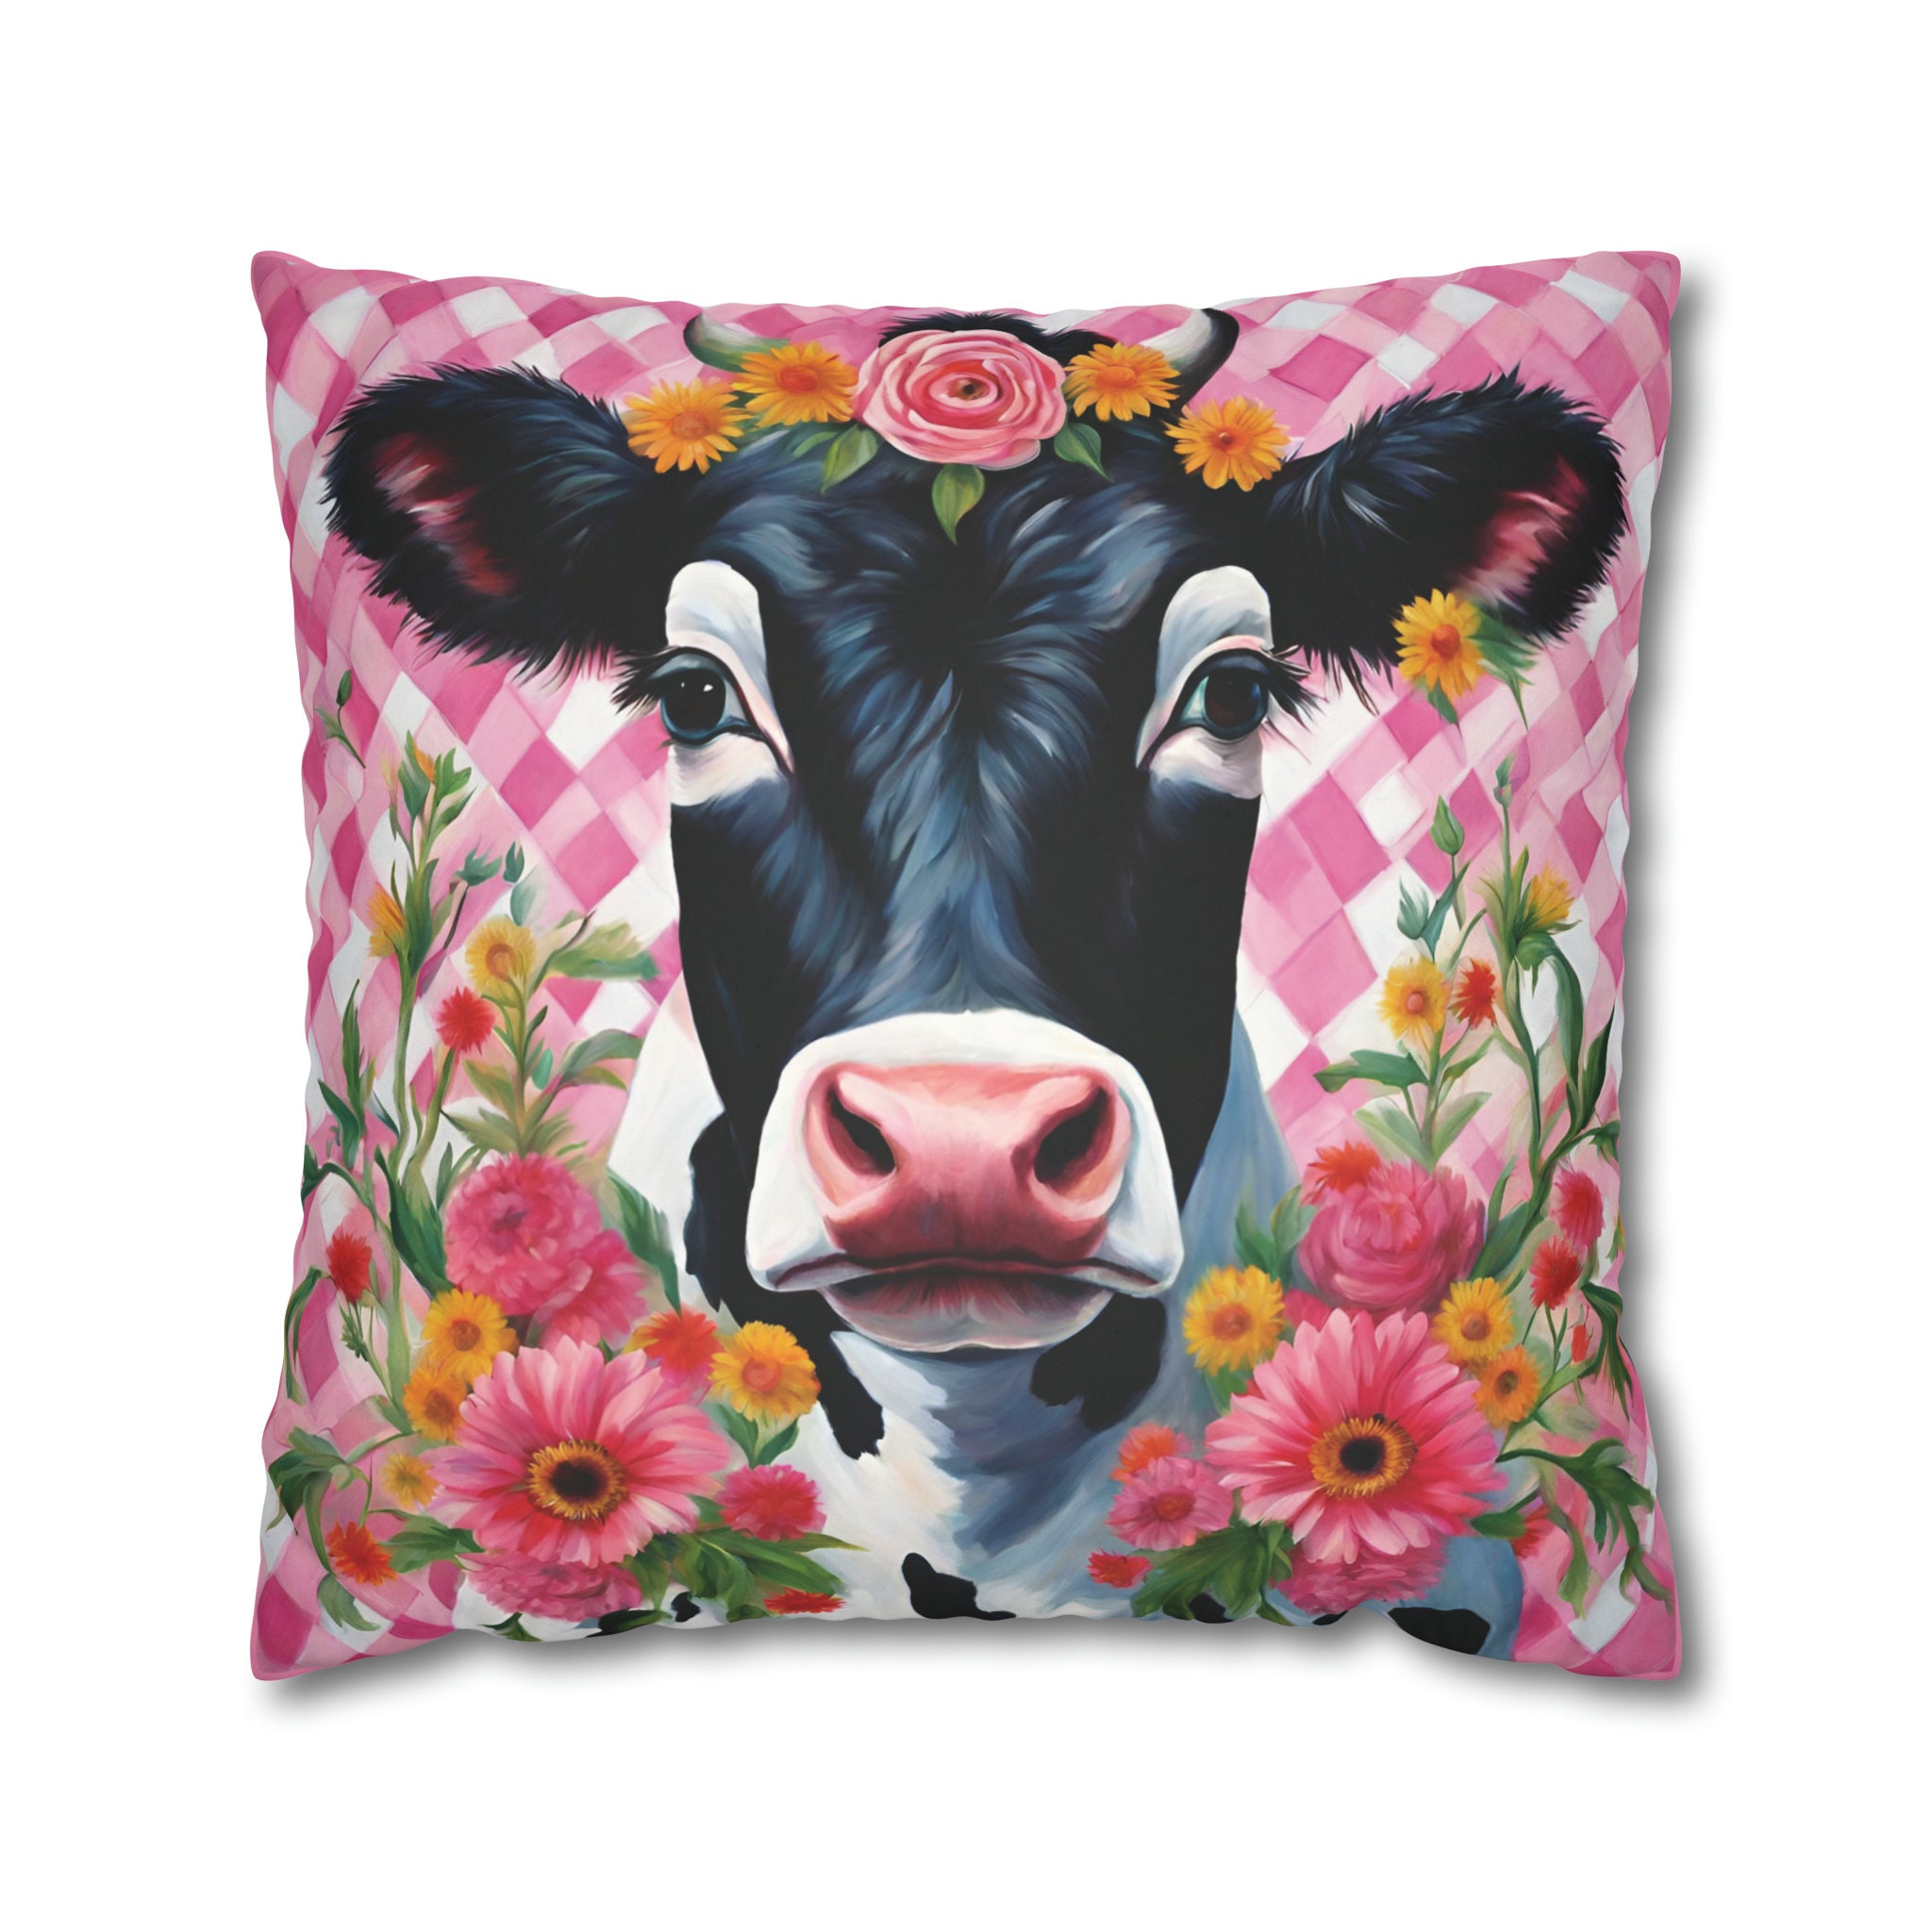 Funny Cow Cattle Decorations Pillow Covers 12x20 Set of 2, Cotton Linen  Reversible Throw Pillows Covers for Outdoor Couch Sofa Living Room Animal